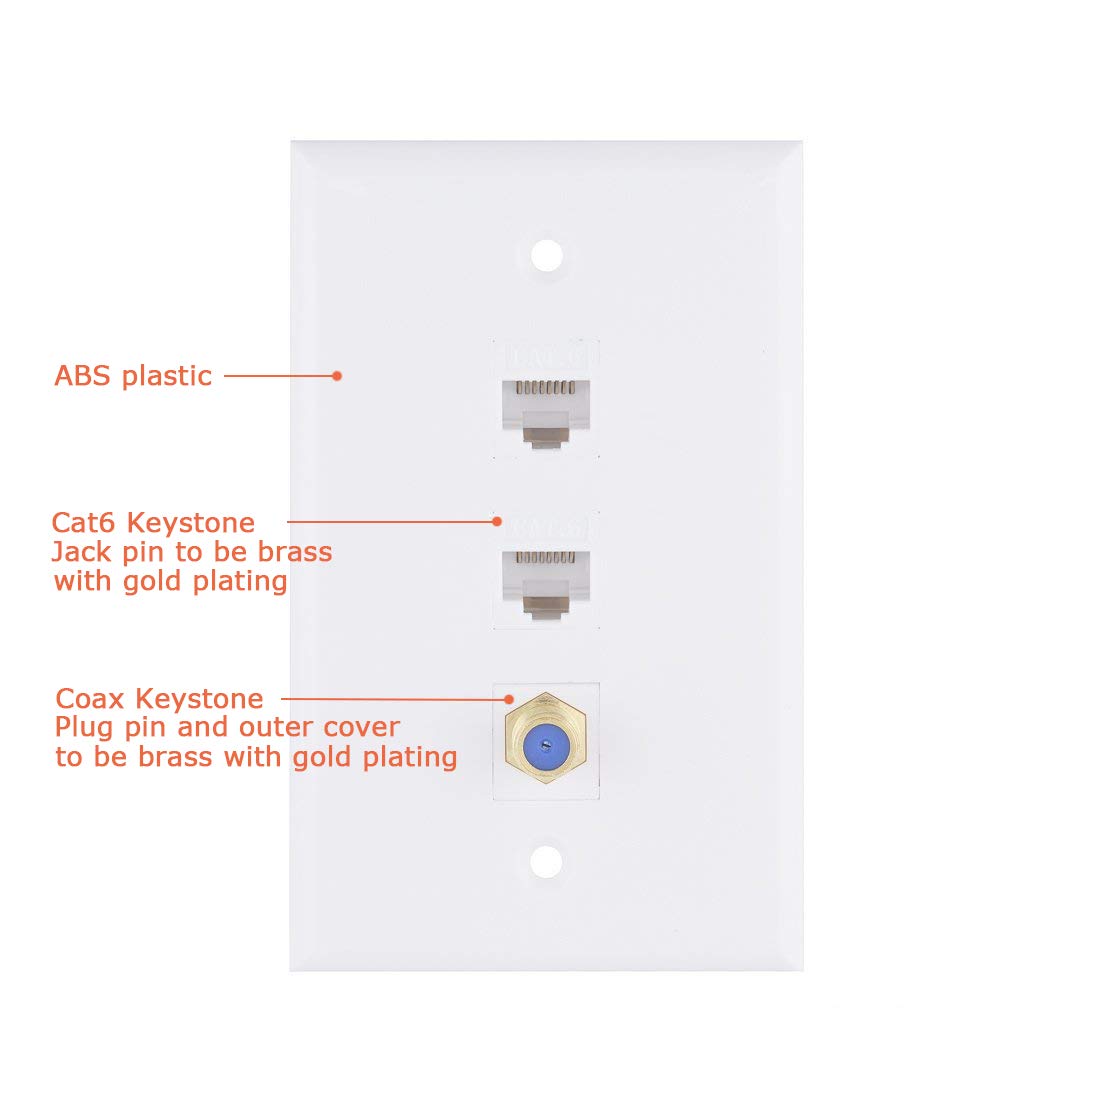 Ethernet Coax Wall Plate, 3 Port Cat6 Keystone Female to Female, 1 Port F Type Connector Coax Keystone Female to Female Wall Plate - White